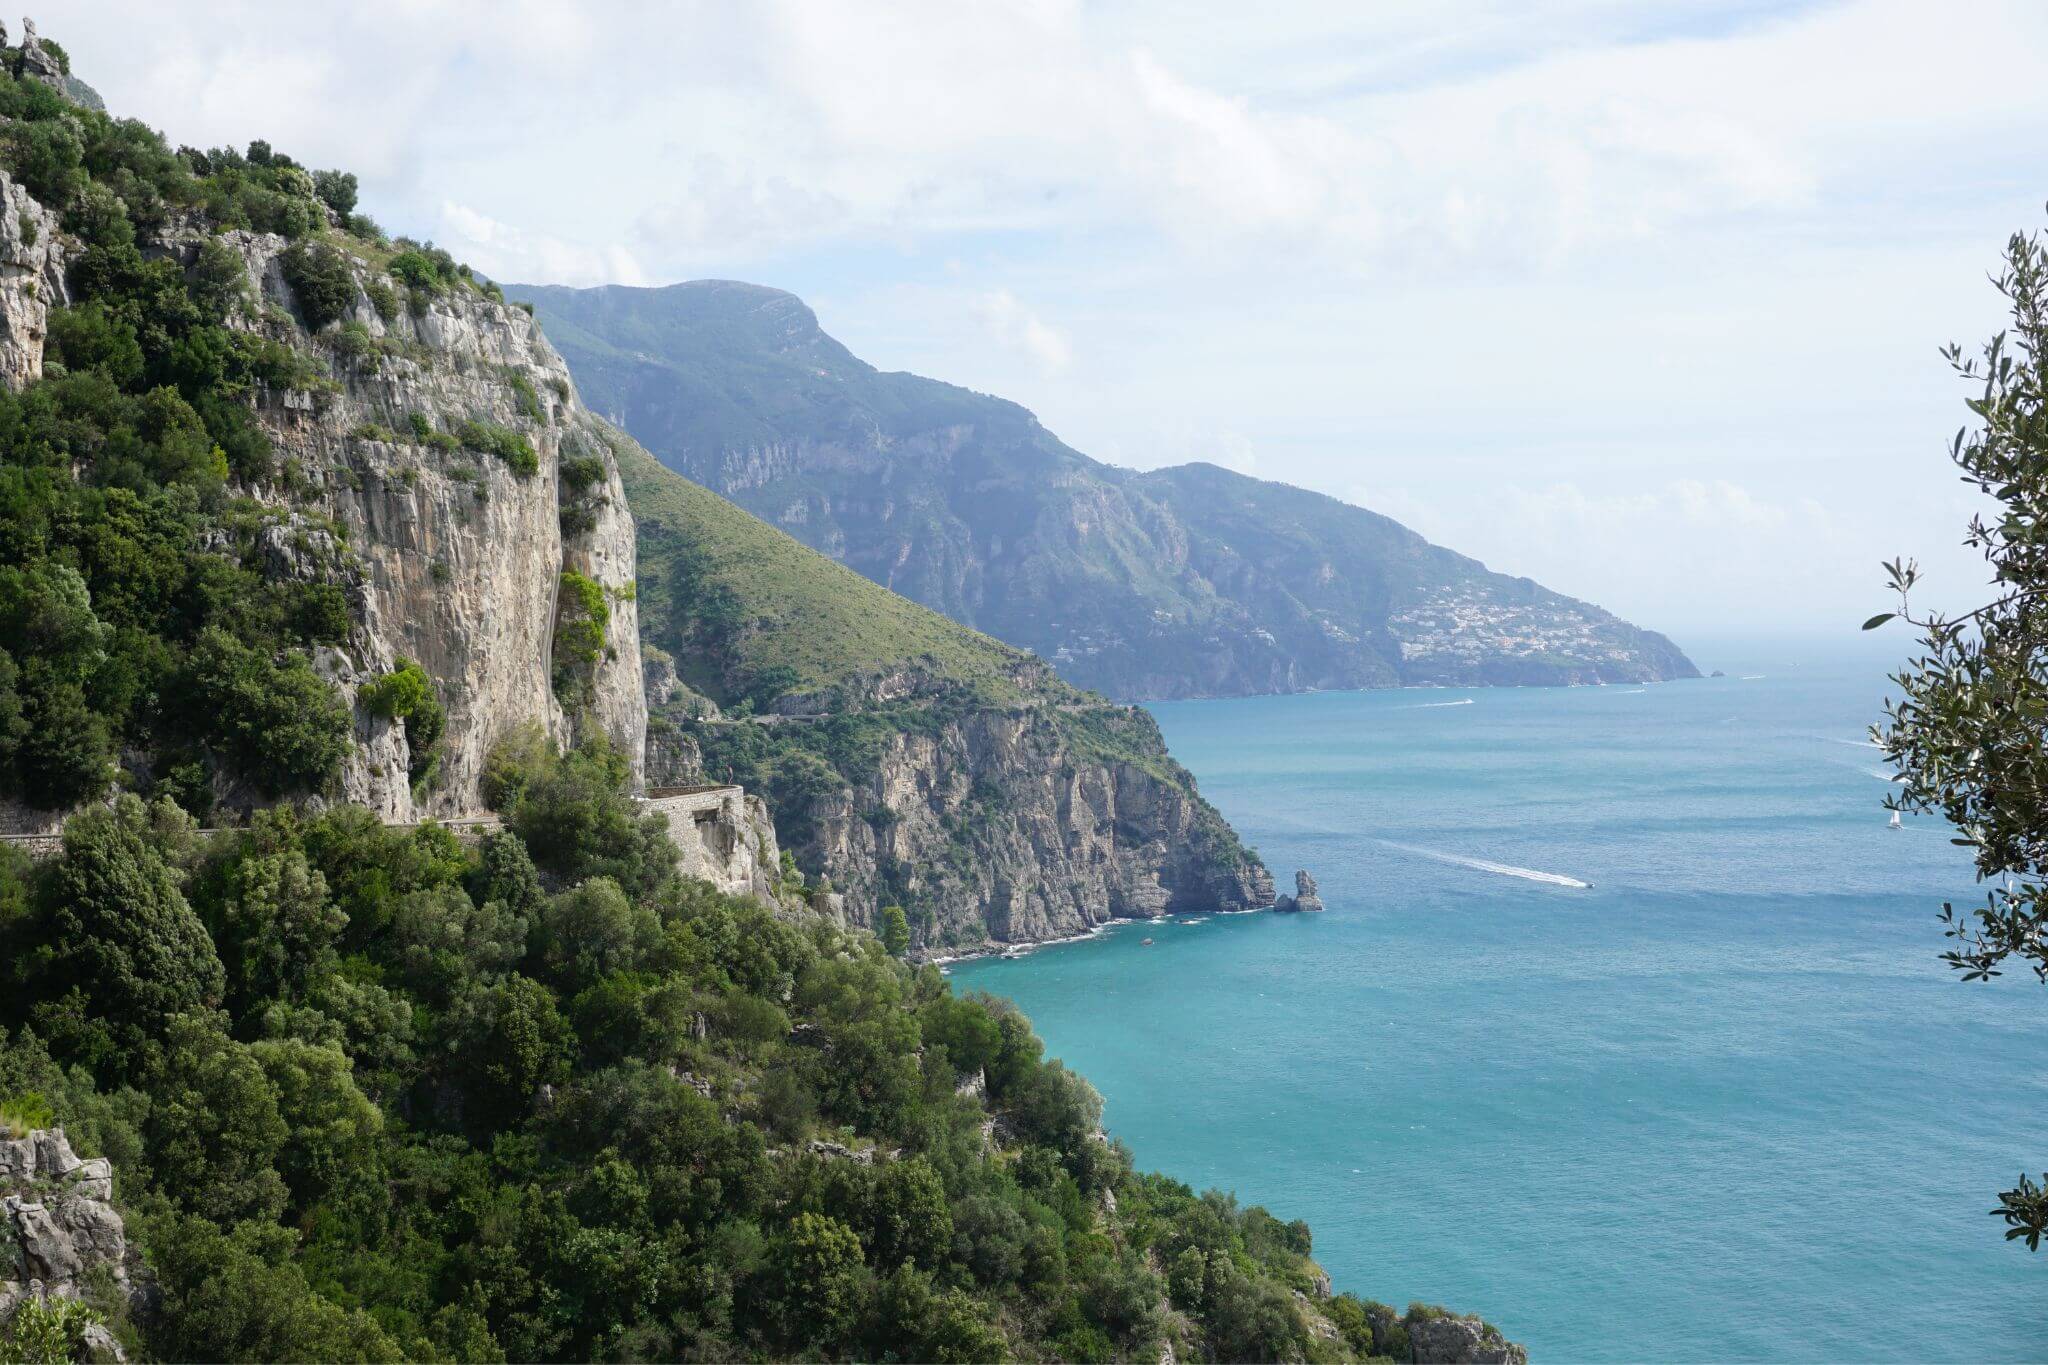 View of the rugged Amalfi Coast Line and the beautiful blue sea at the cliffs.